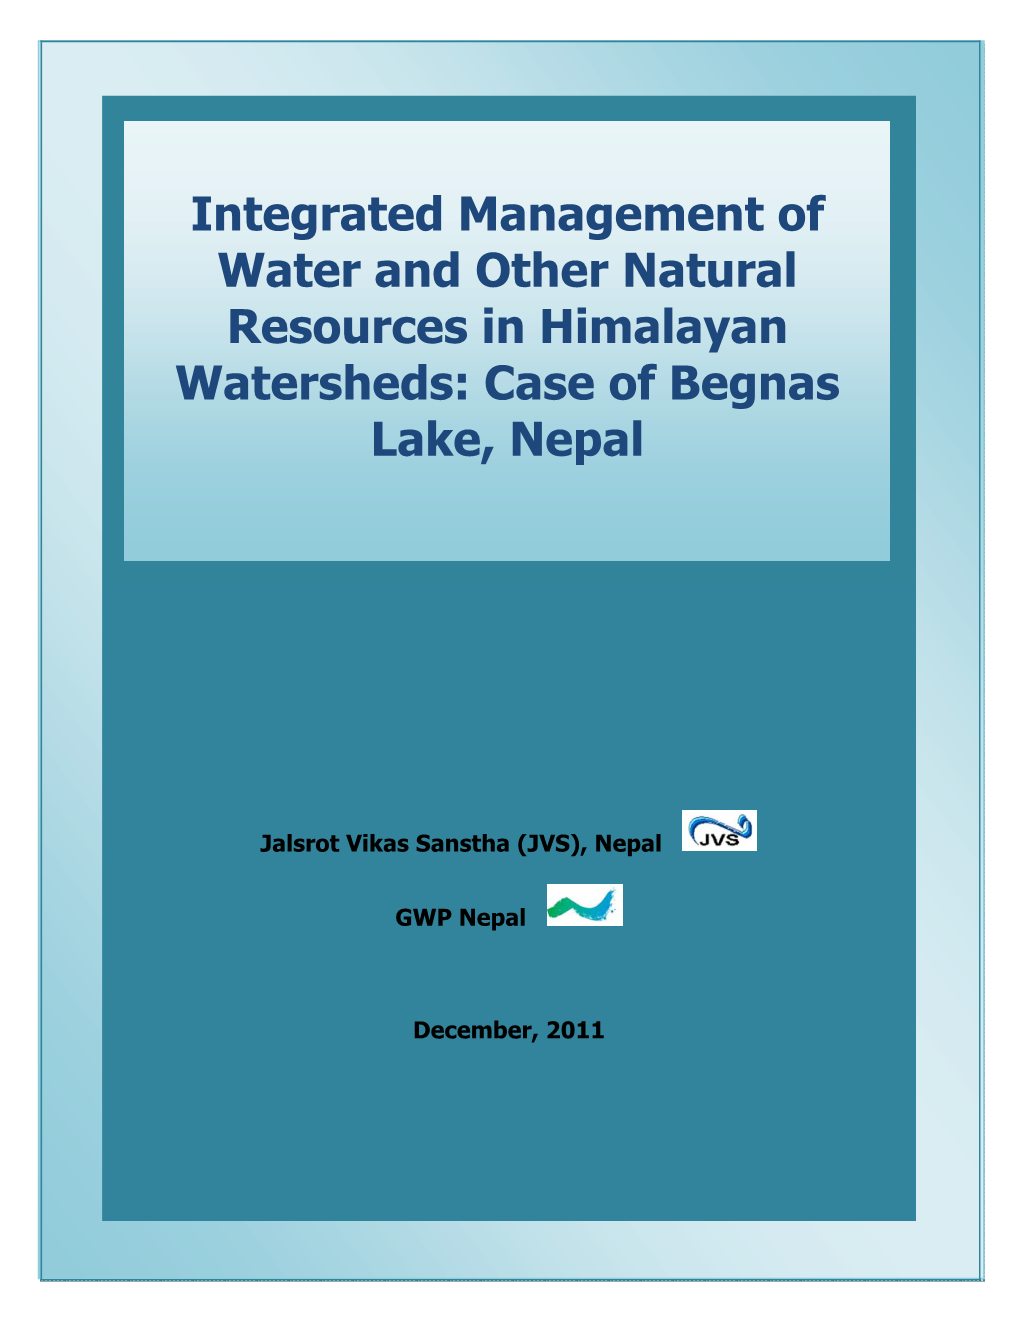 Integrated Management of Water and Other Natural Resources in Himalayan Watersheds: Case of Begnas Lake, Nepal